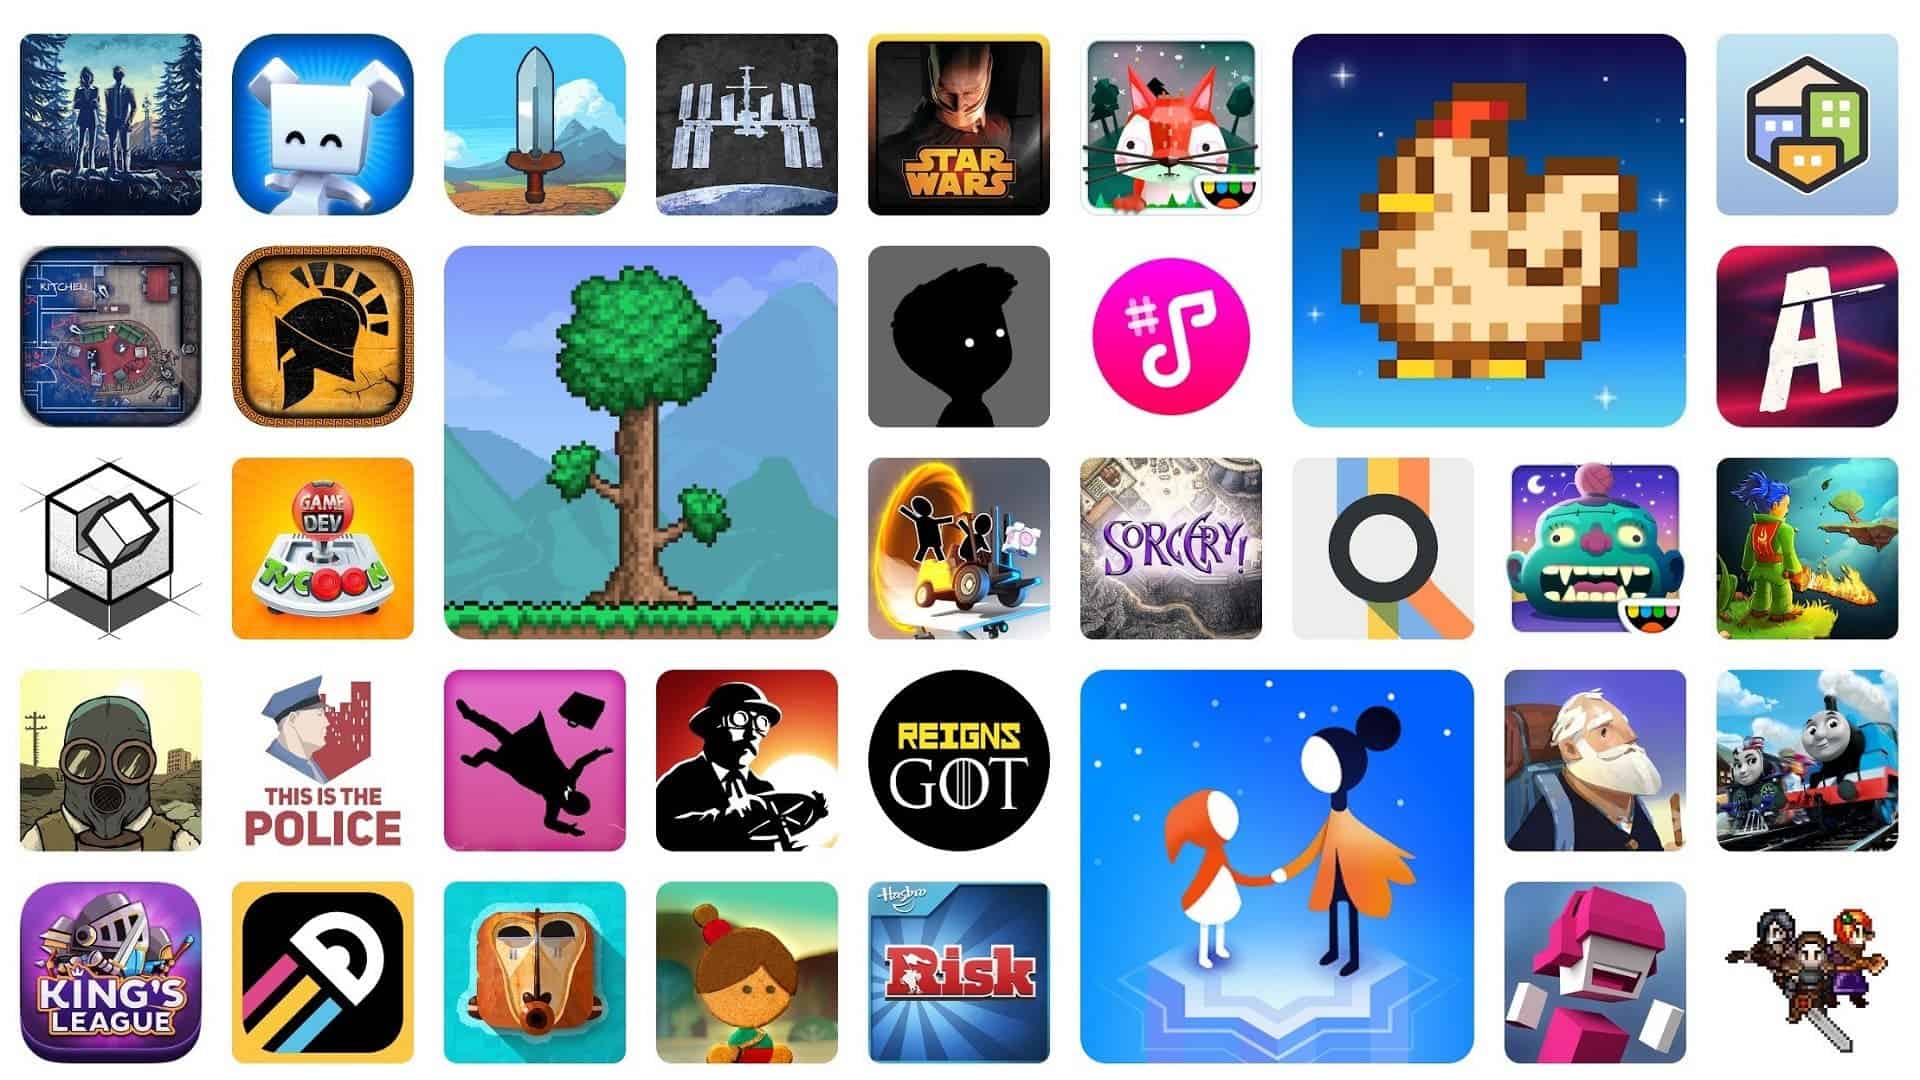 Google Launches Games in Google+, Now Play Free Games Using Your Google+  Account – AskVG